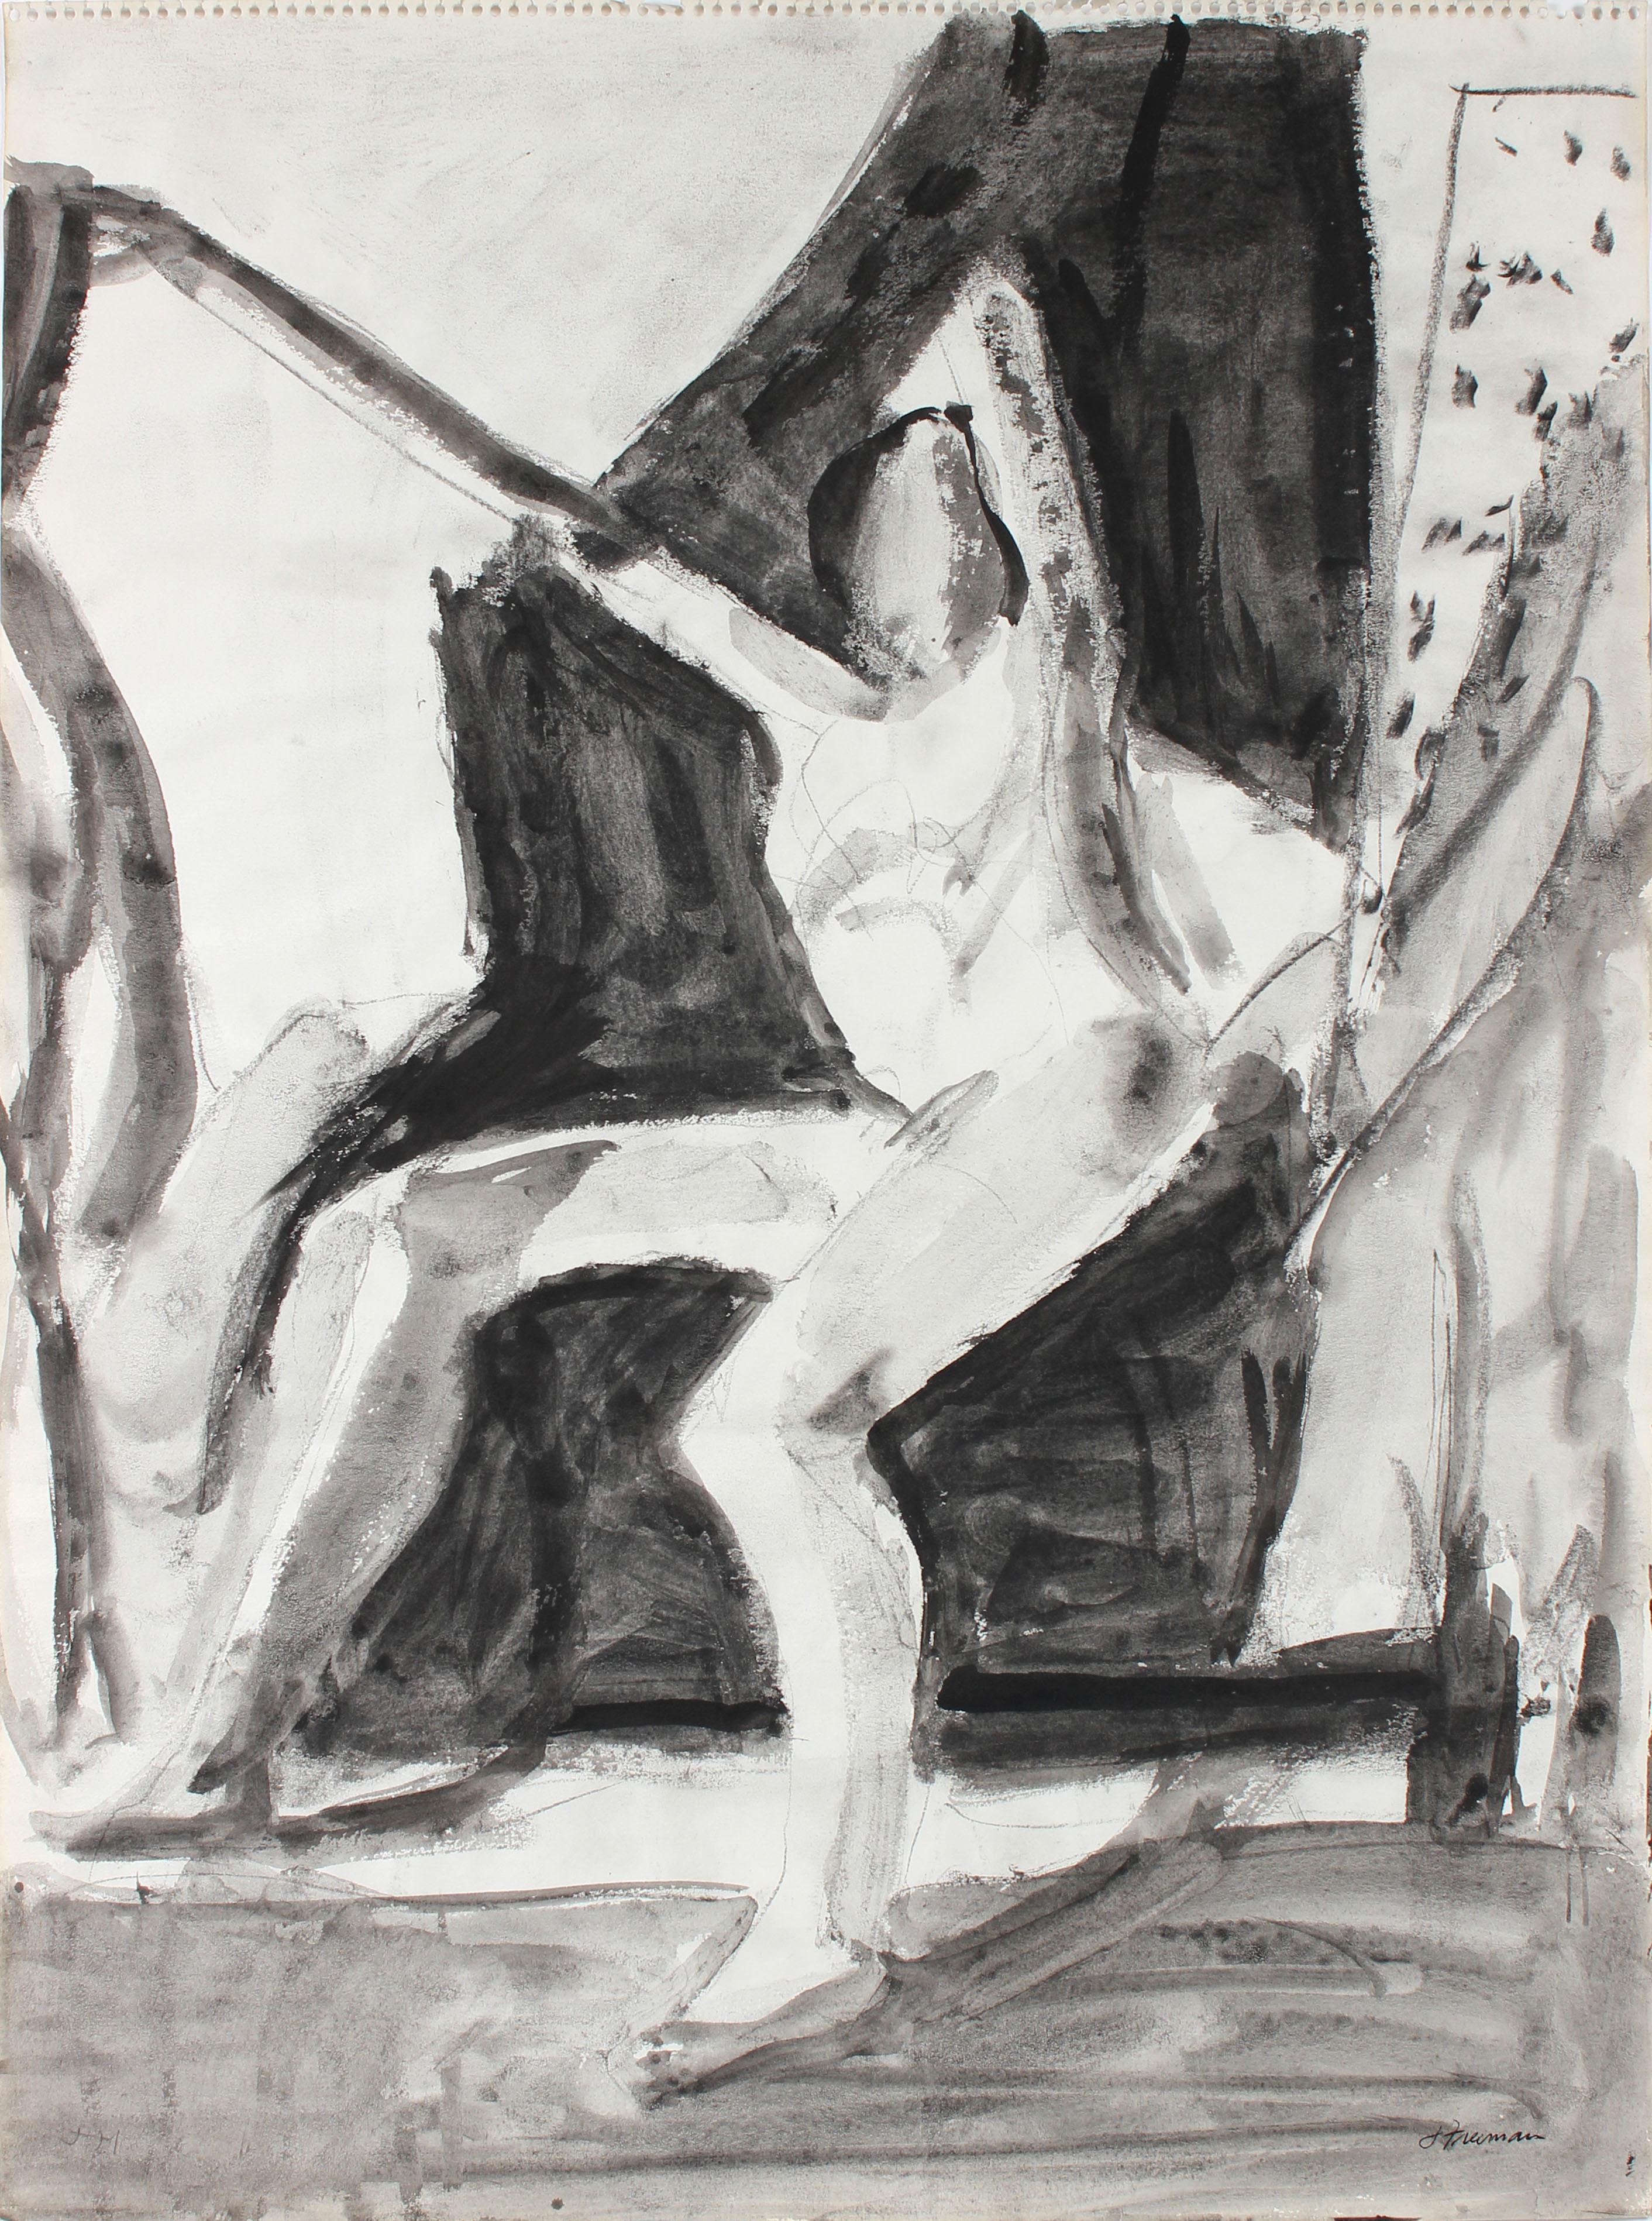 Jack Freeman Figurative Art - 1970's Bay Area Figurative Drawing in Ink and Charcoal 